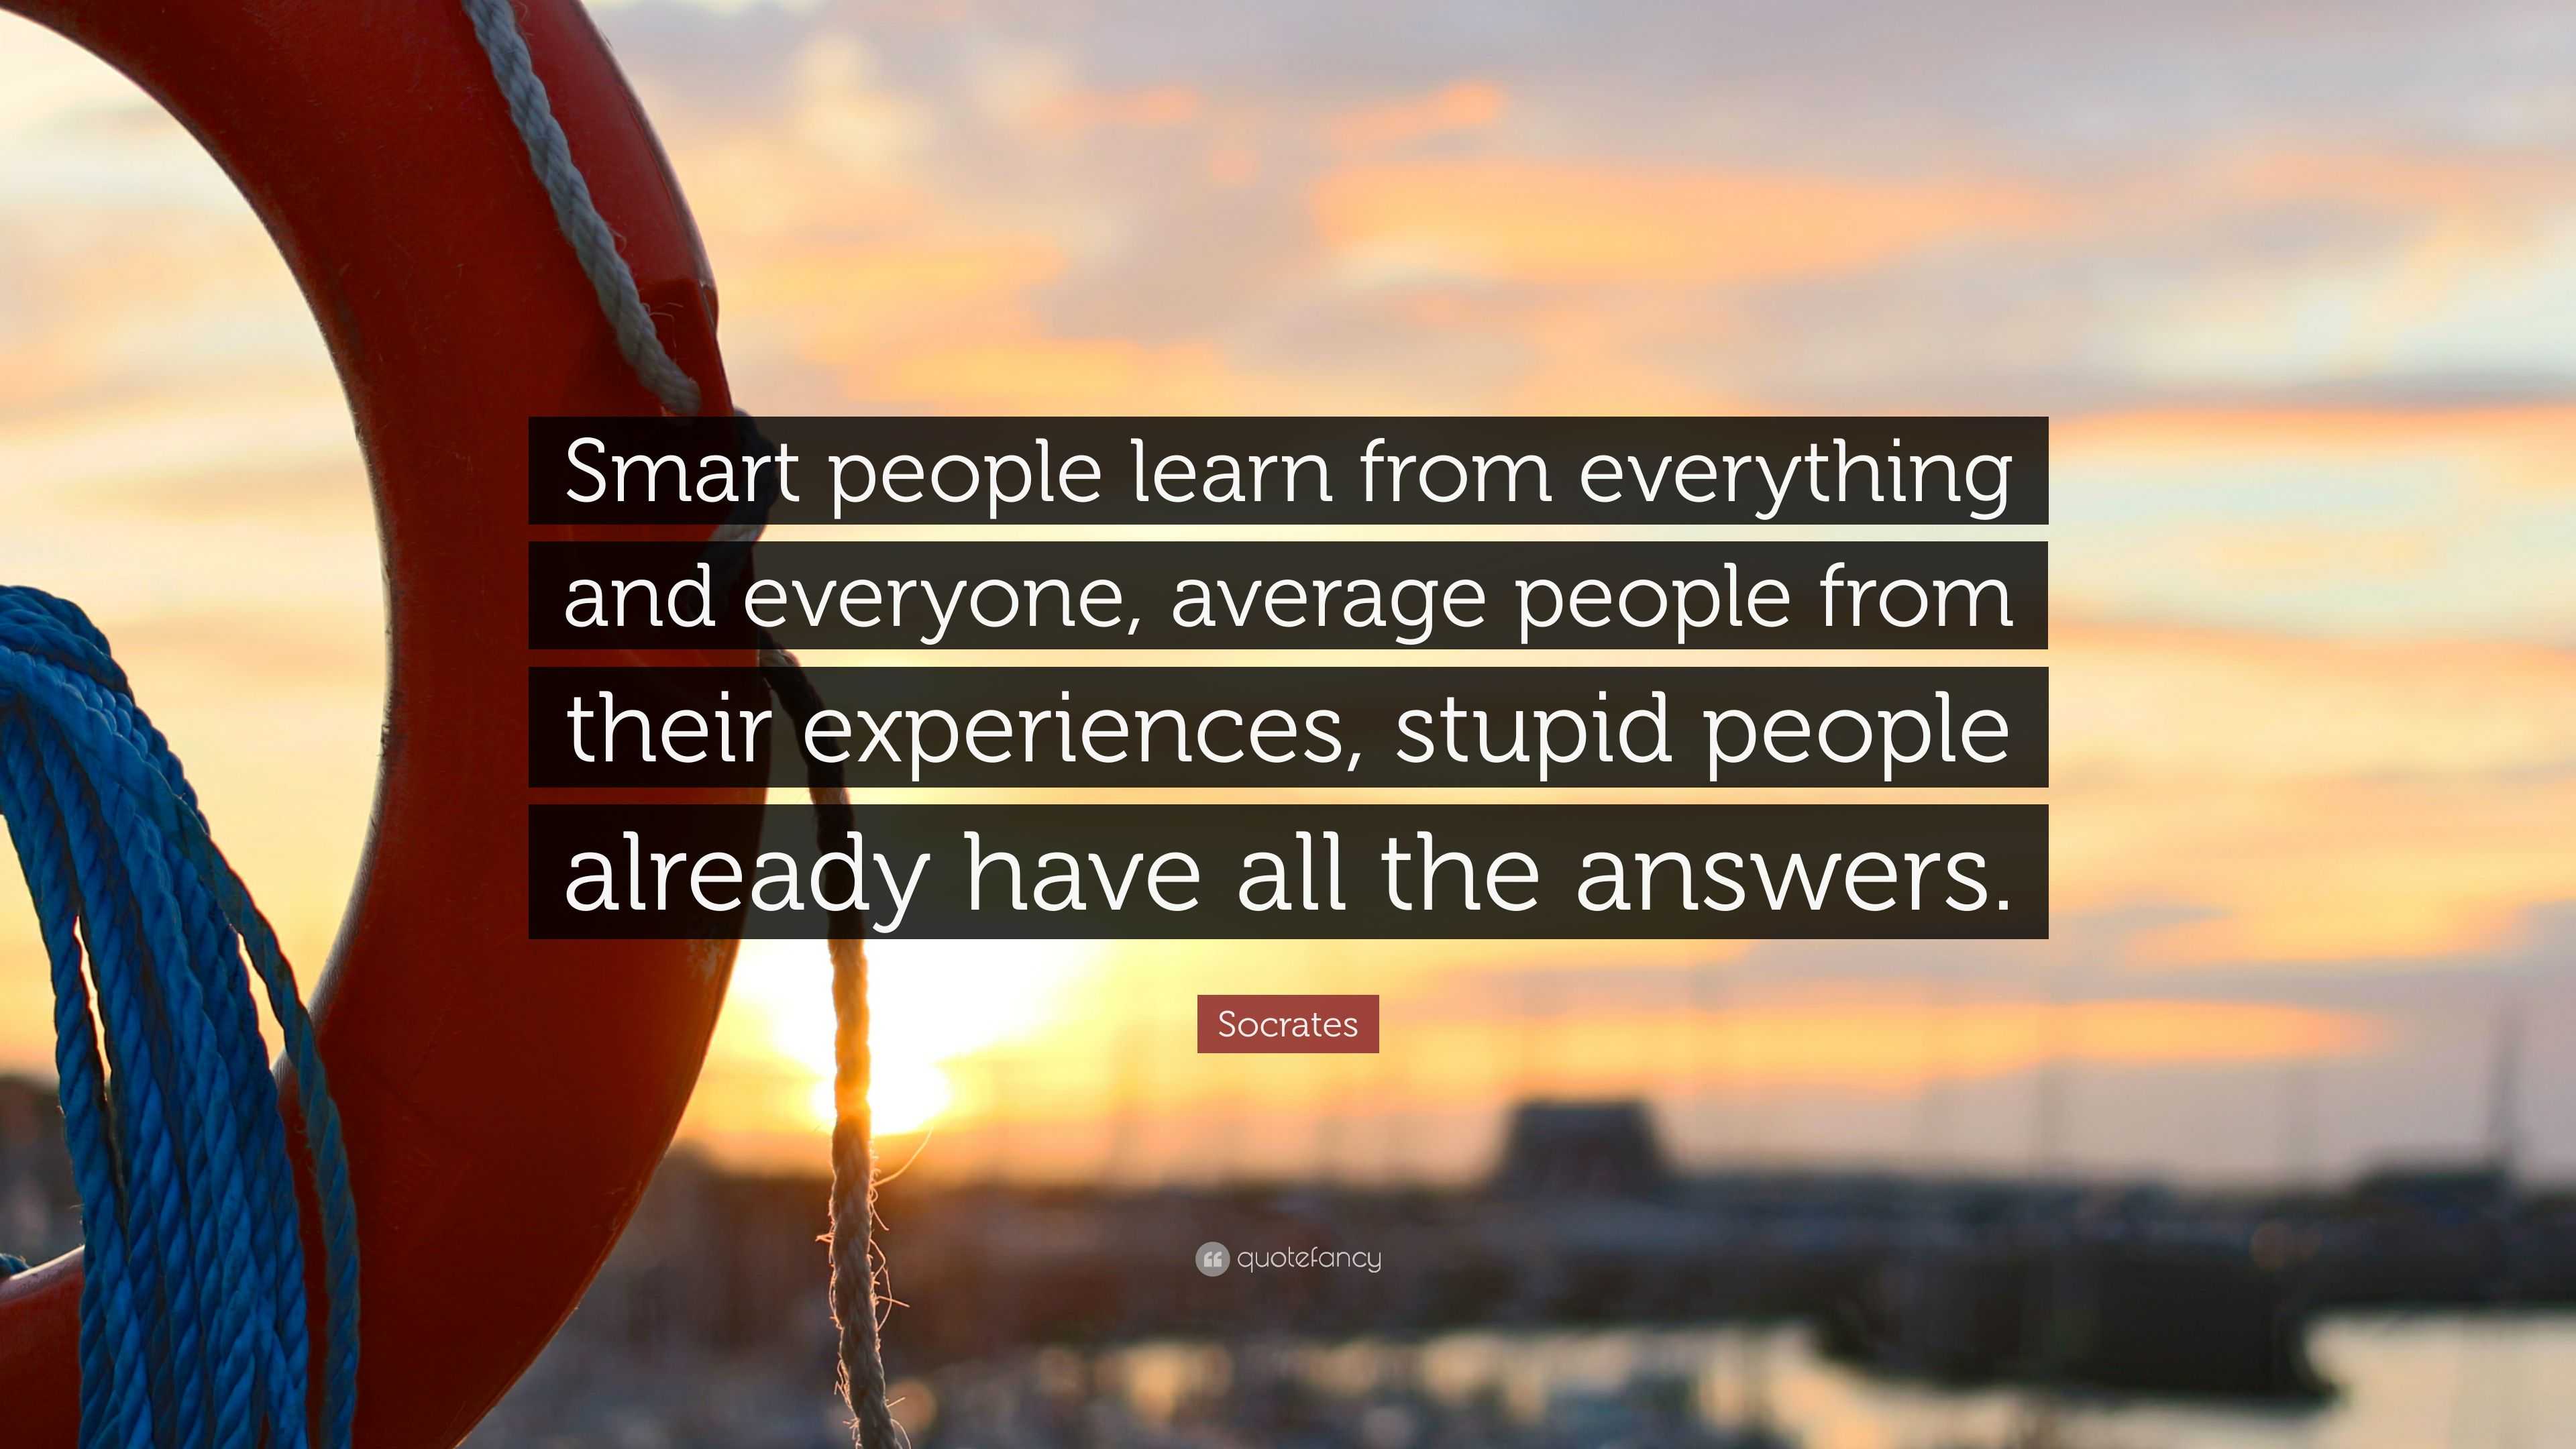 Socrates Quote: “Smart people learn from everything and everyone